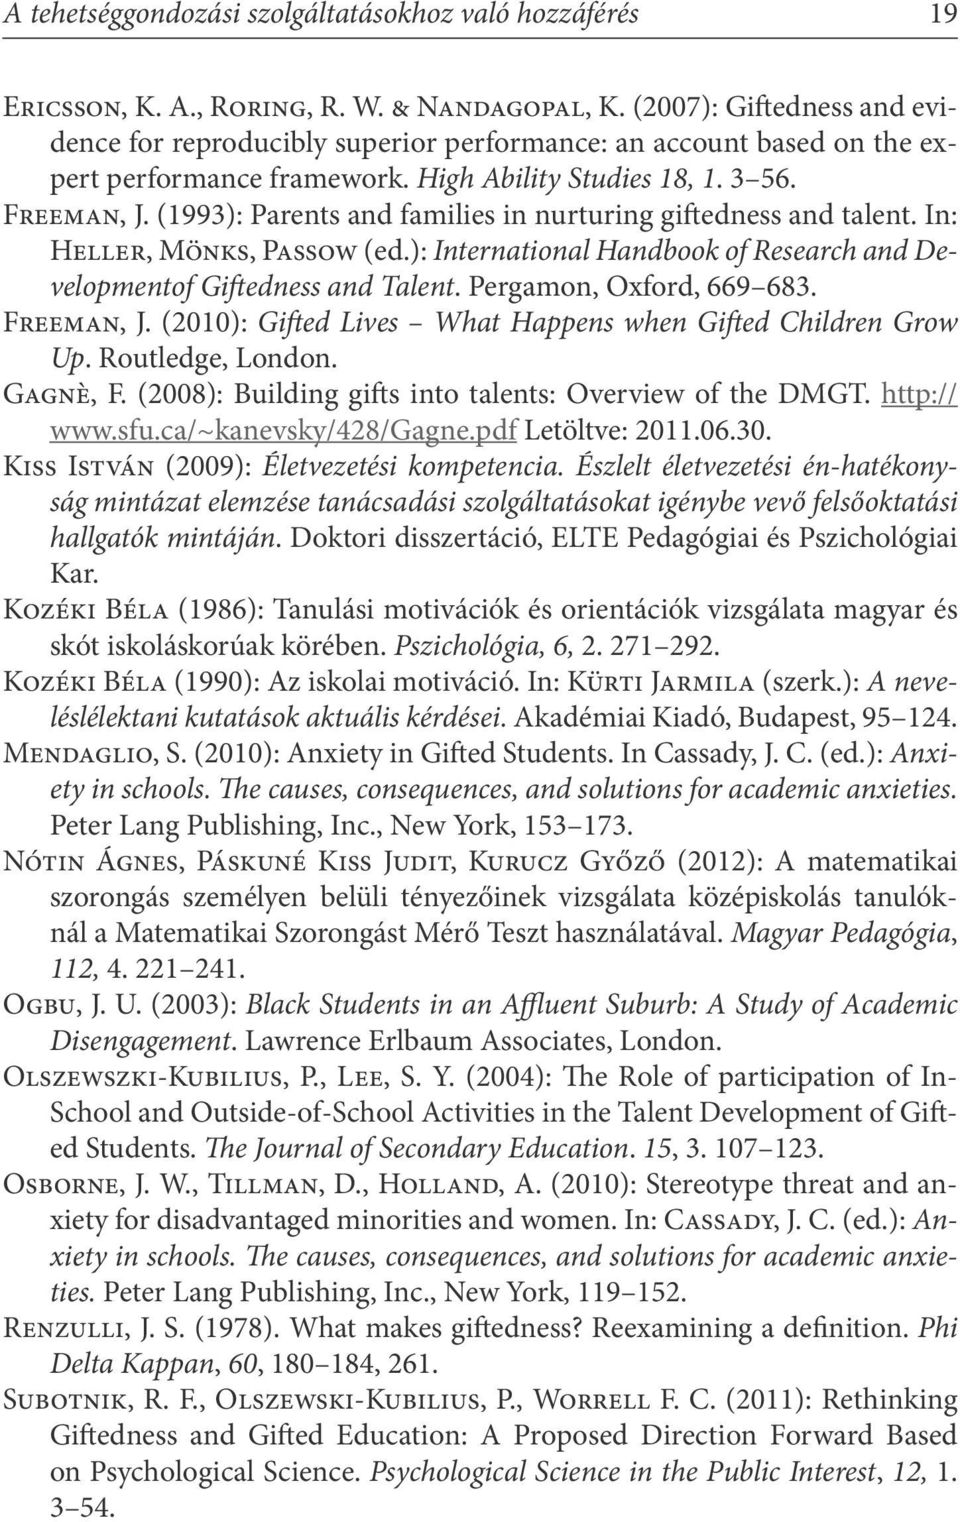 (1993): Parents and families in nurturing giftedness and talent. In: Heller, Mönks, Passow (ed.): International Handbook of Research and Developmentof Giftedness and Talent. Pergamon, Oxford, 669 683.